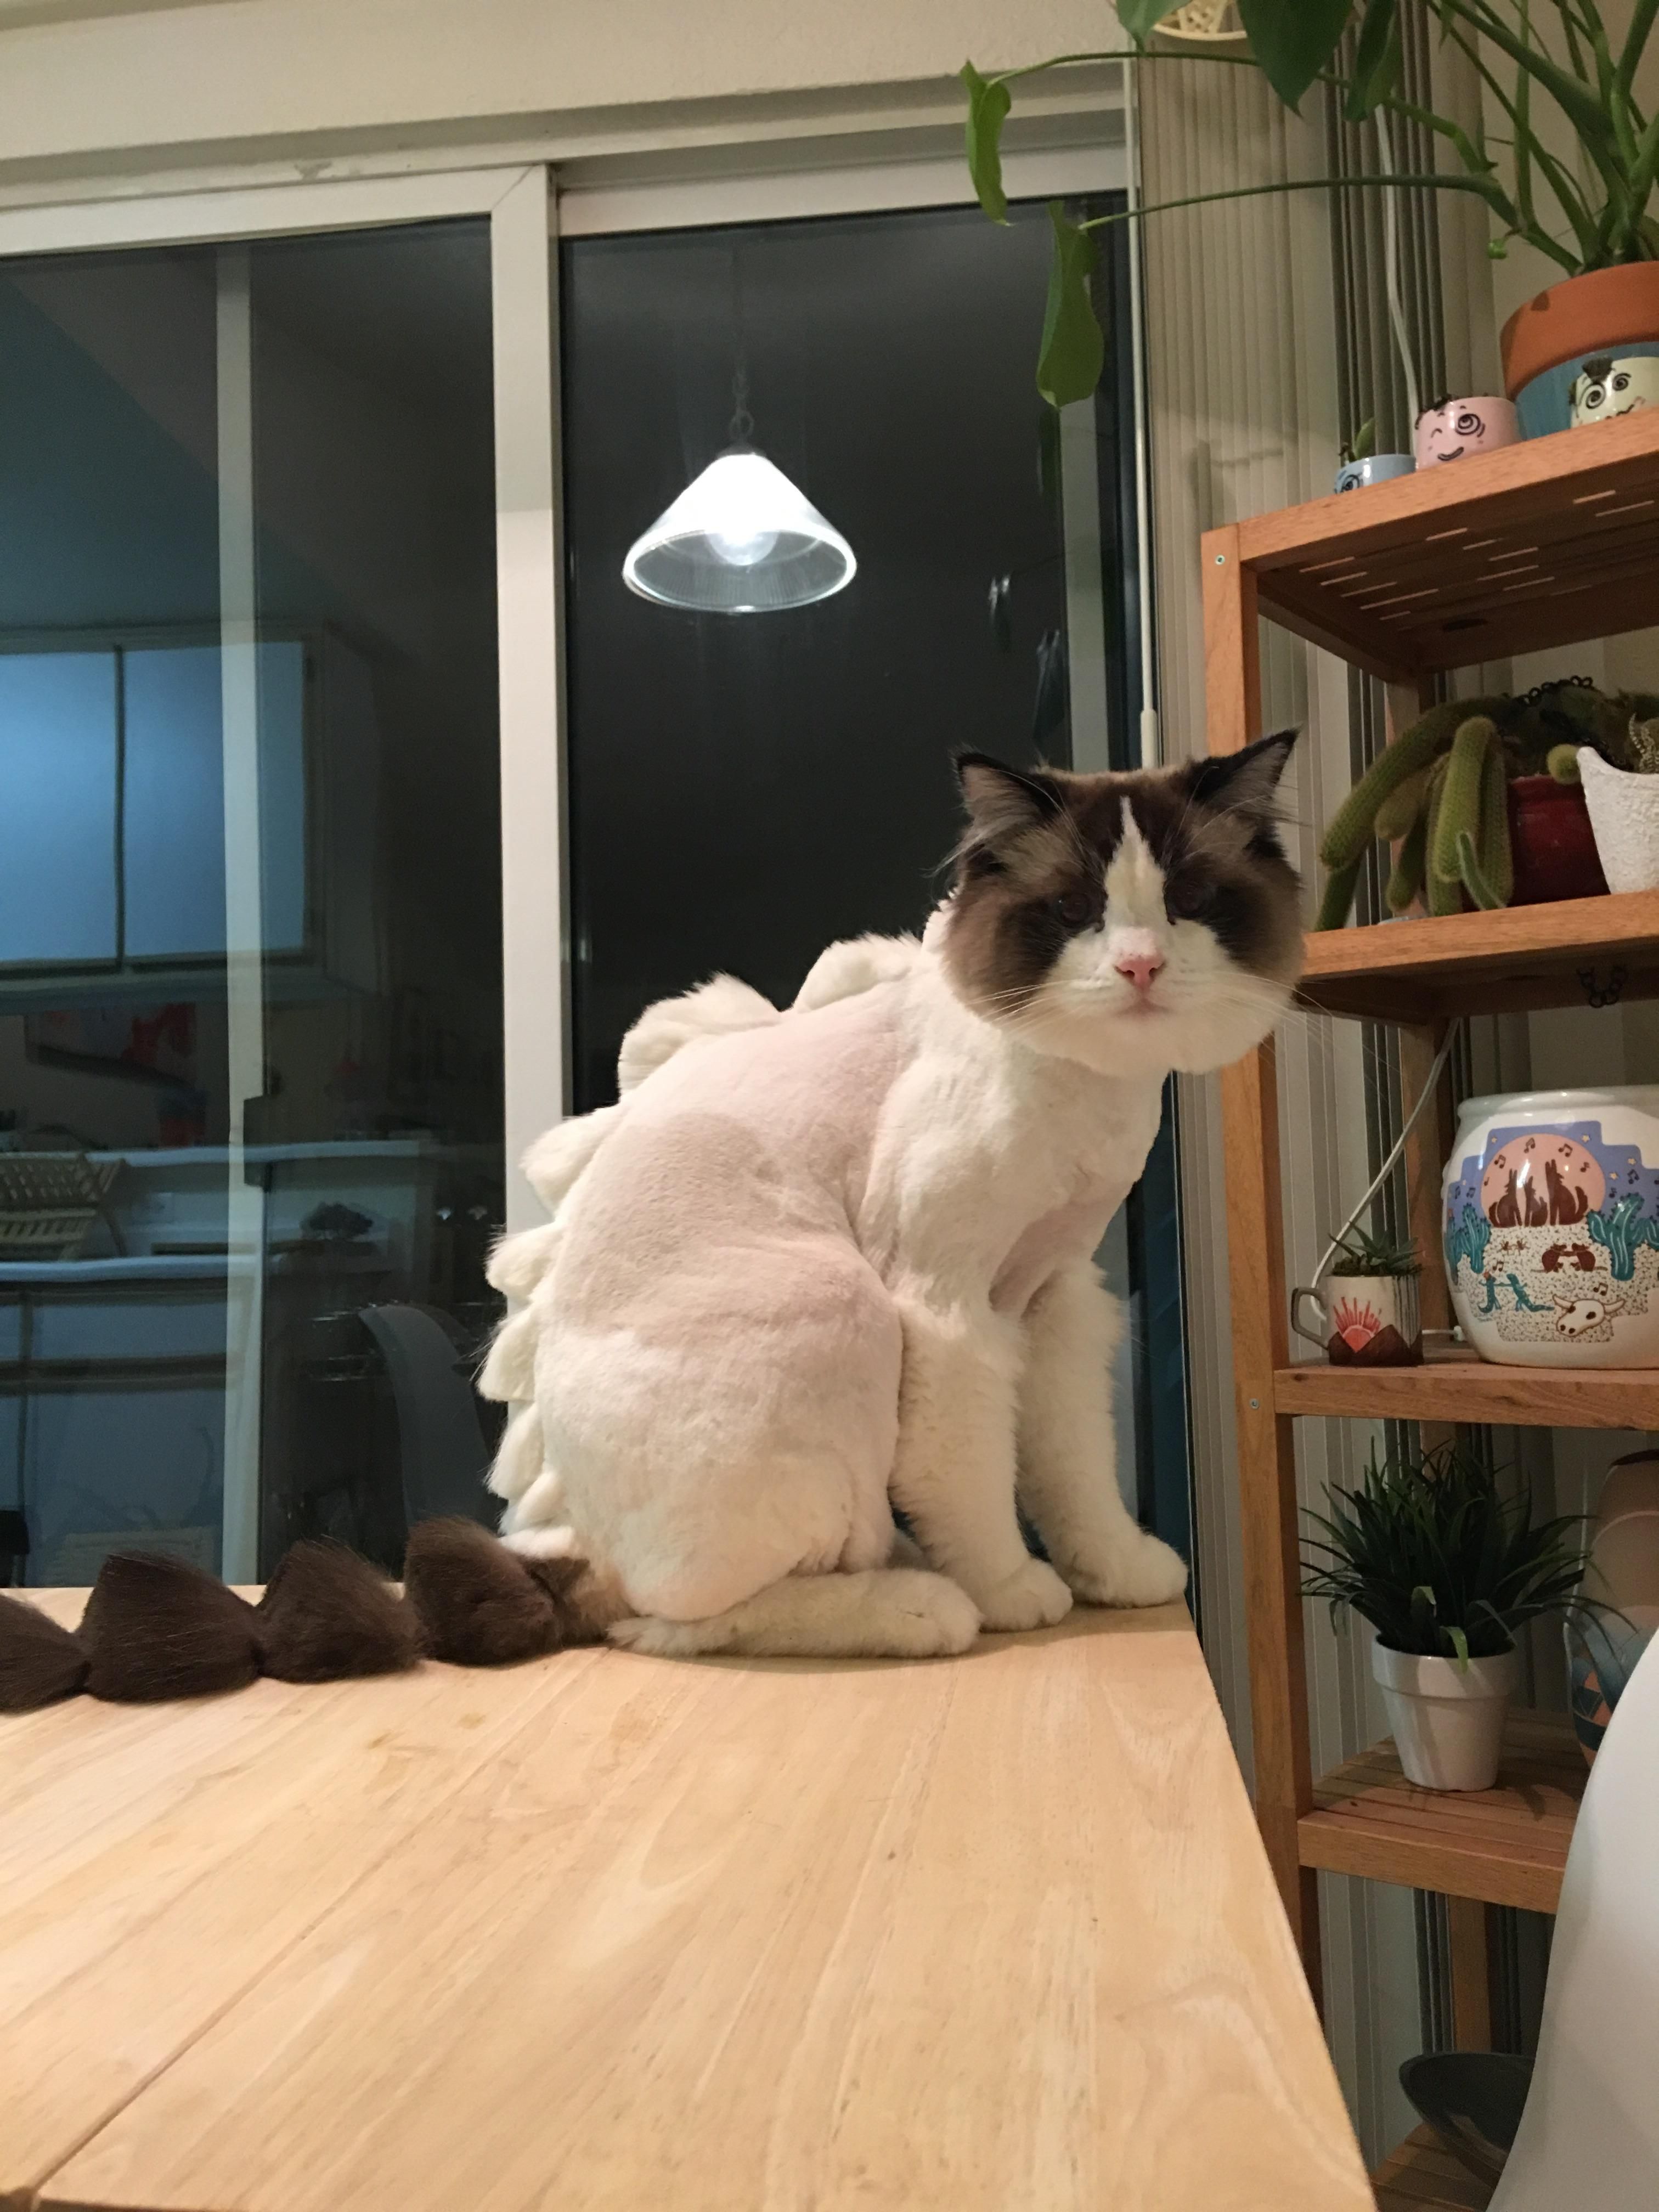 This is what happens when you let your boyfriend take the cat to the groomer.